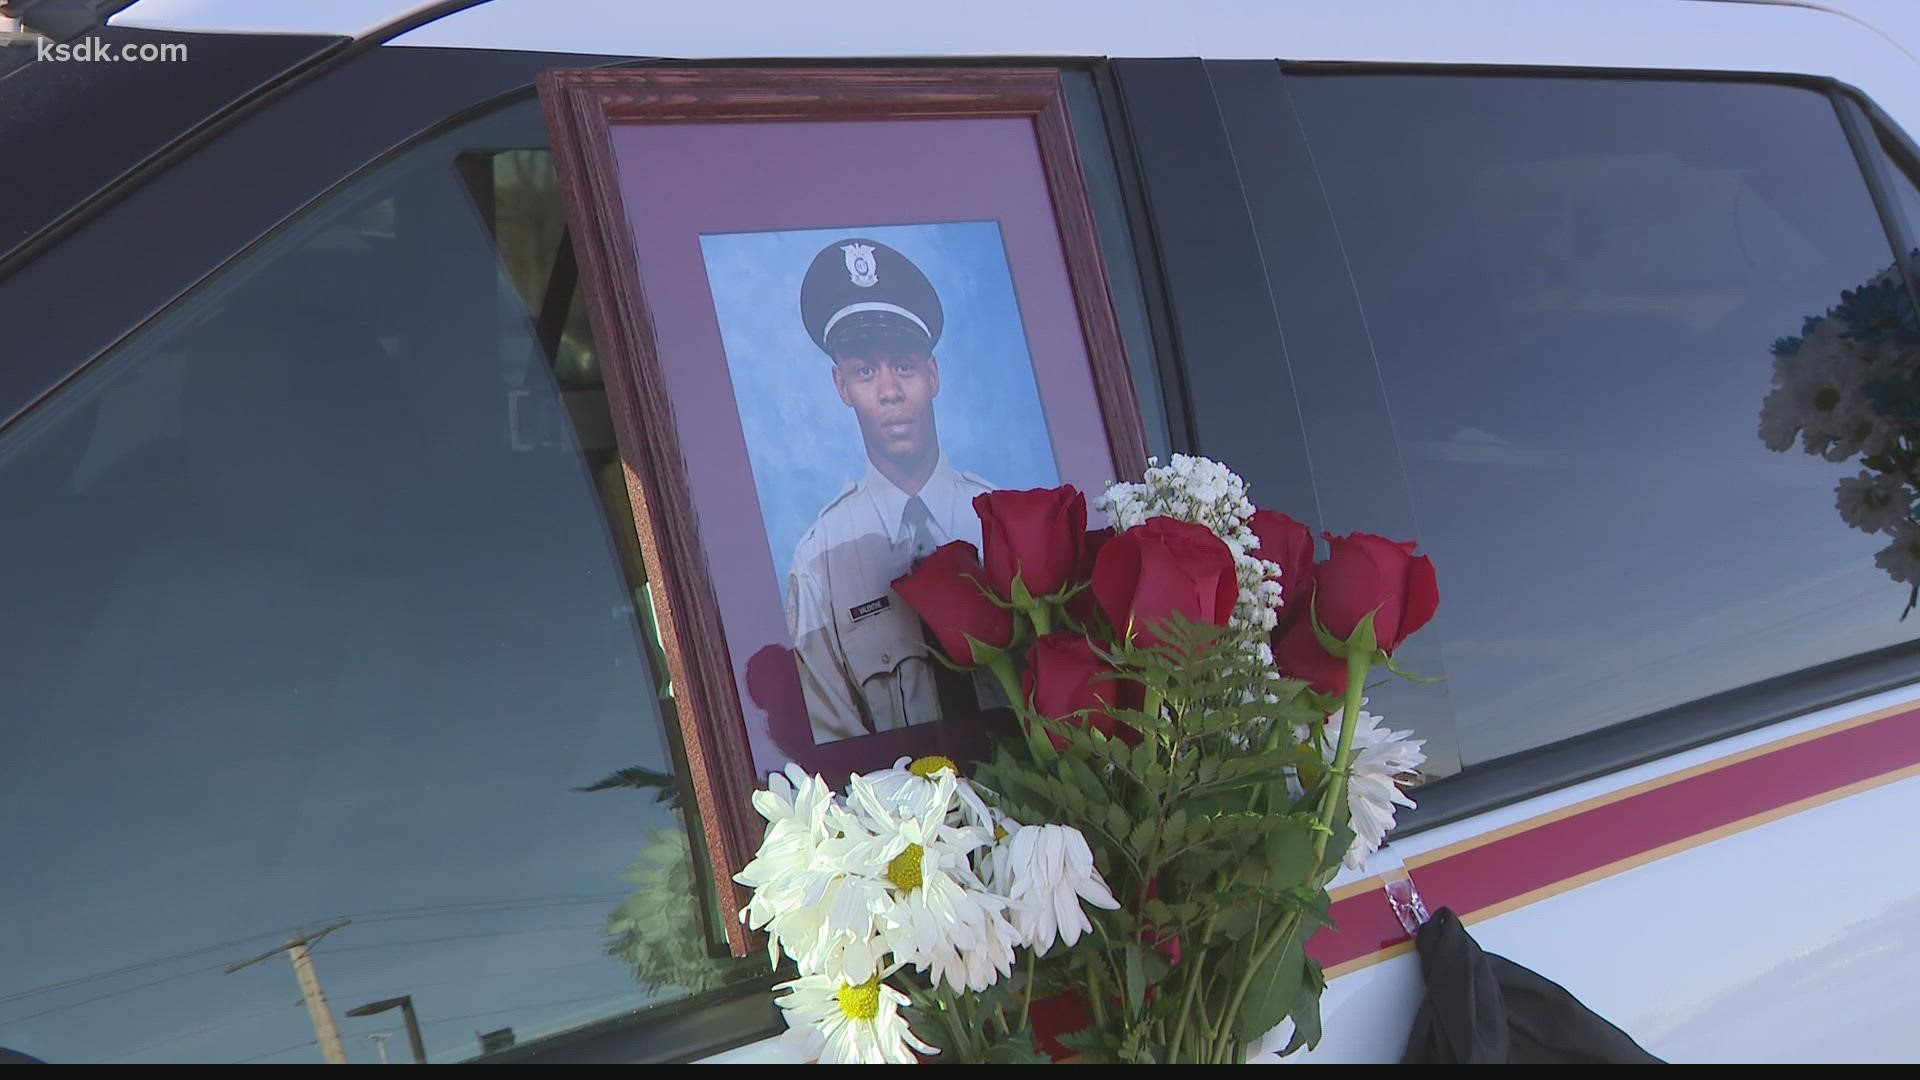 Detective Antonio Valentine was a dedicated police officer and father of four.